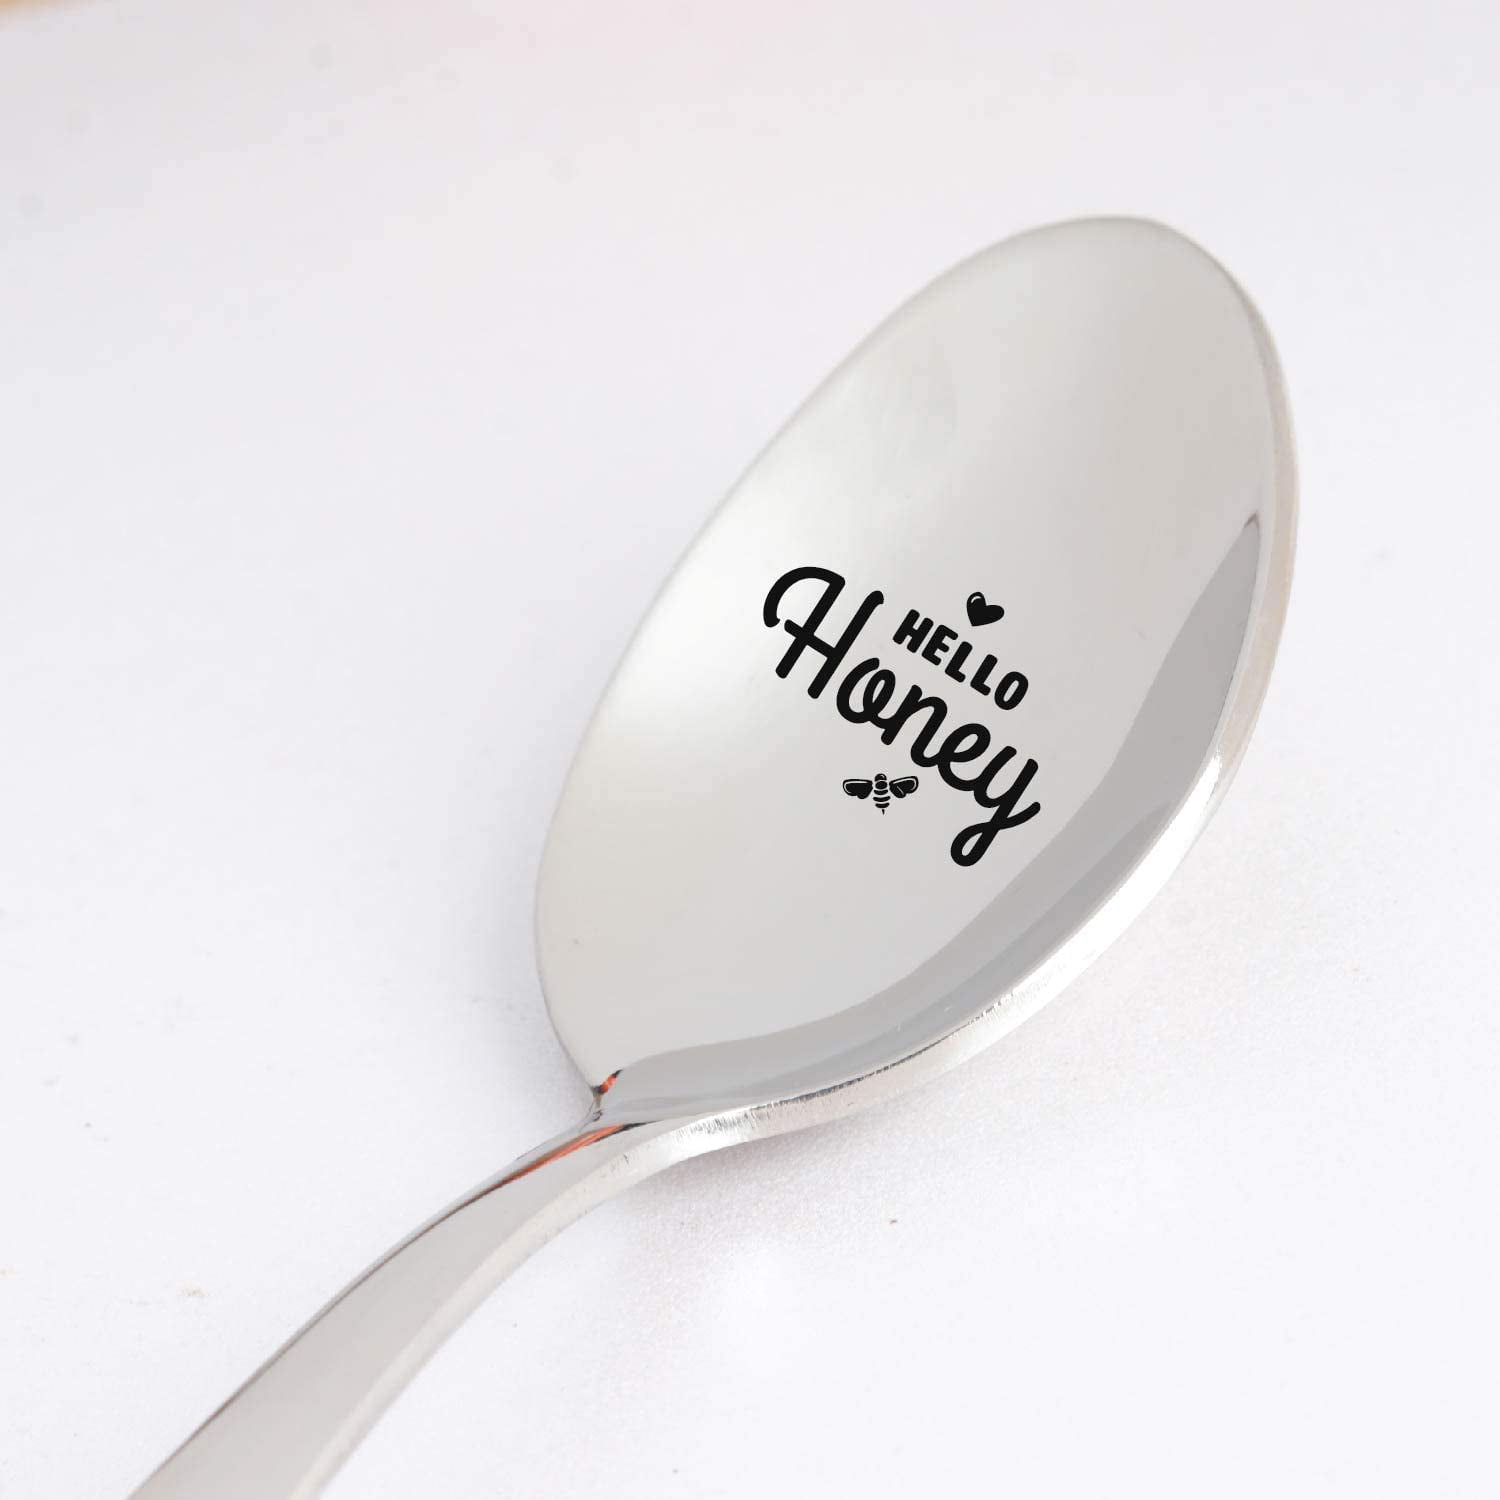 Cute Queen Bee Tea Coffee Spoon for Women Mothers Day/Birthday/Christmas Gifts Funny Queen Bee Spoon Engraved Best Gifts For Wife Girlfriend Sister Fiancee Her